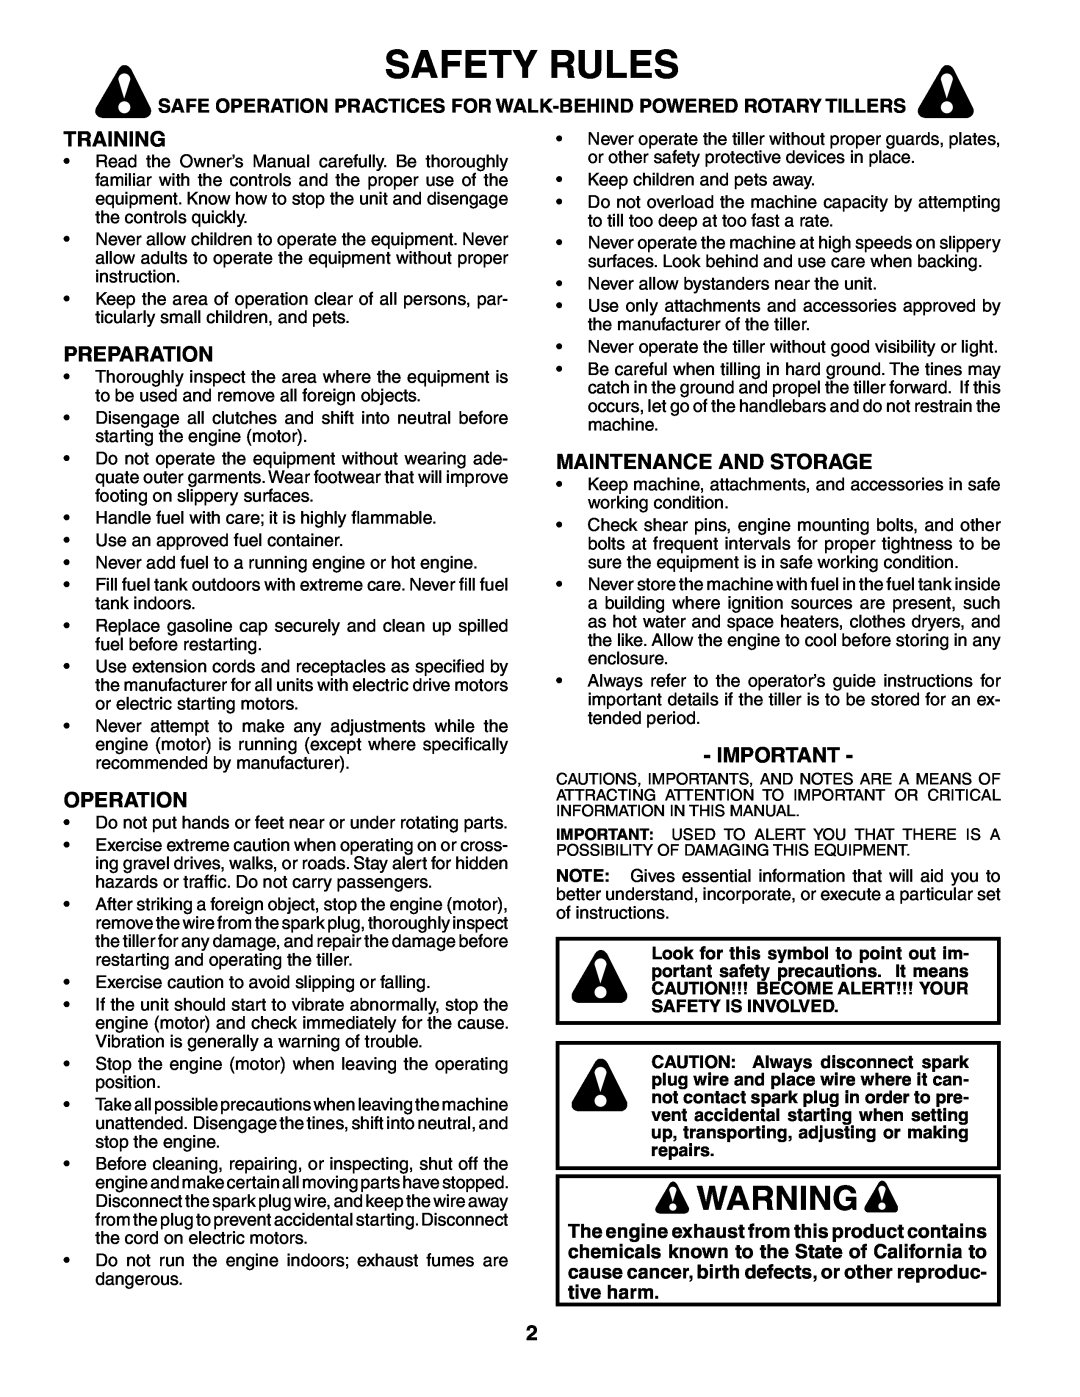 Poulan HDR500L owner manual Safety Rules, Training, Preparation, Operation, Maintenance And Storage 